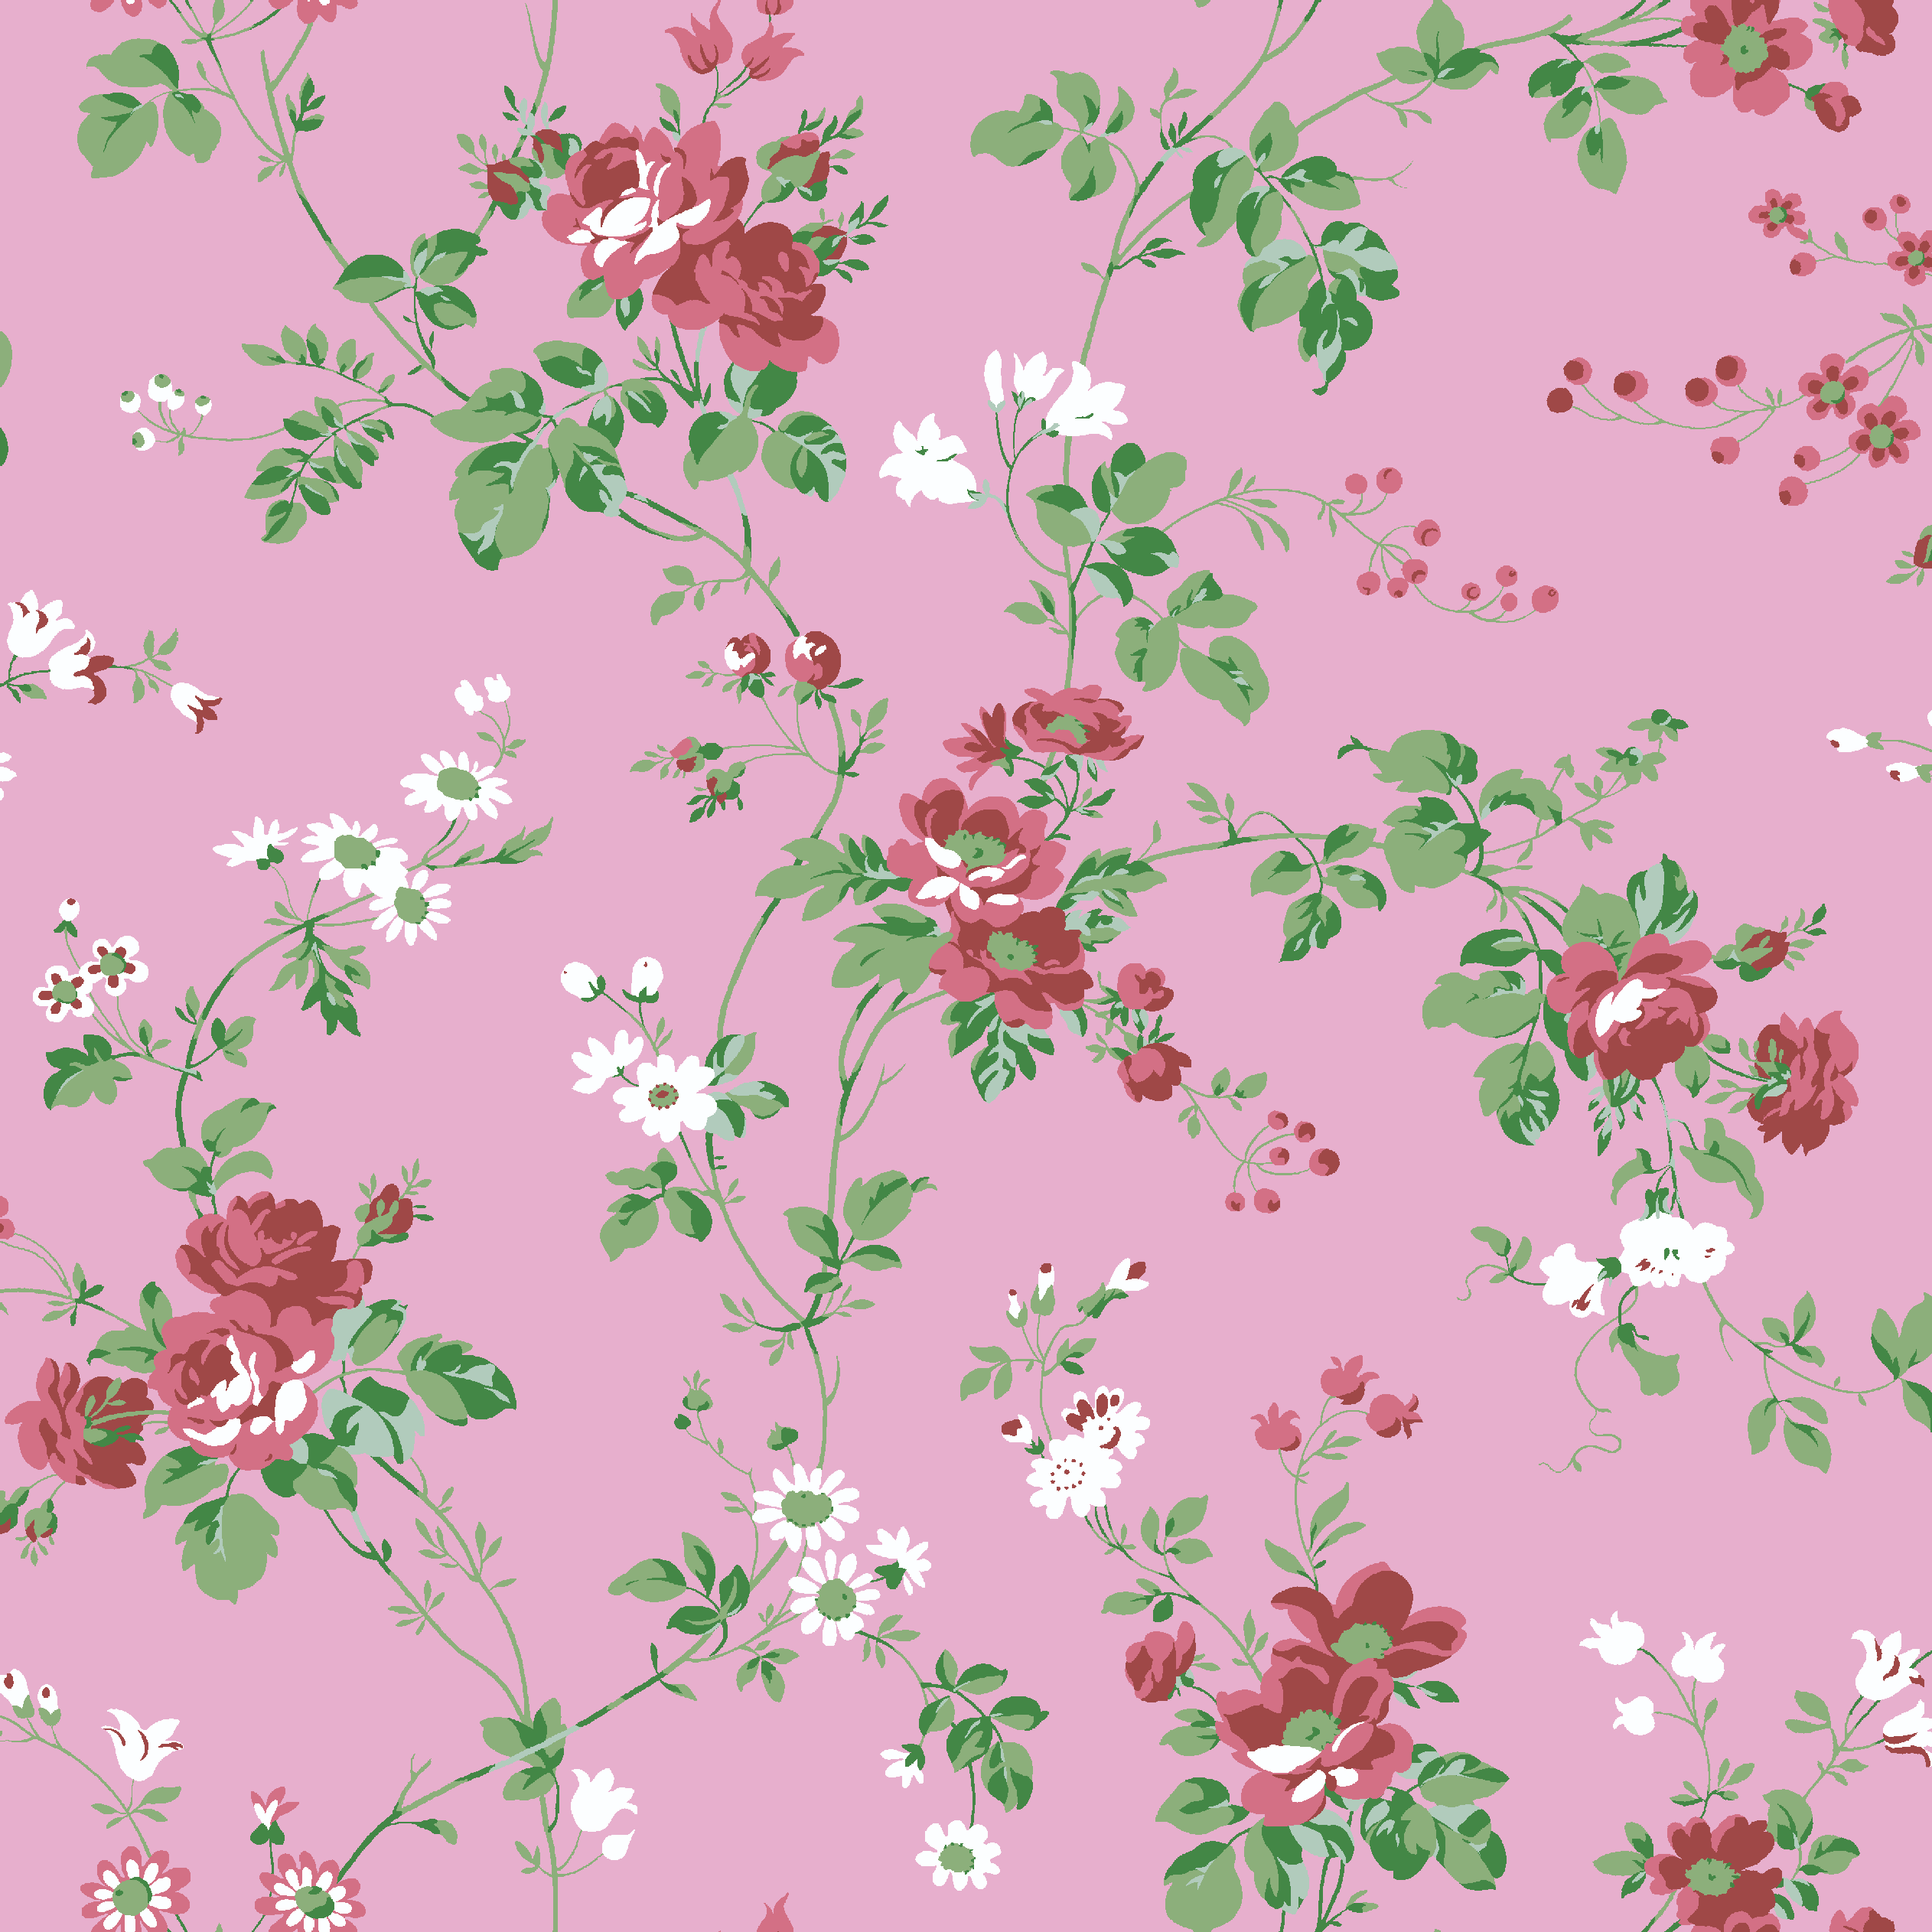 Waverly Inspirations 44" 100% Cotton Charlotte Vine Carnation Sewing & Craft Fabric By the Yard, Pink, Green and White